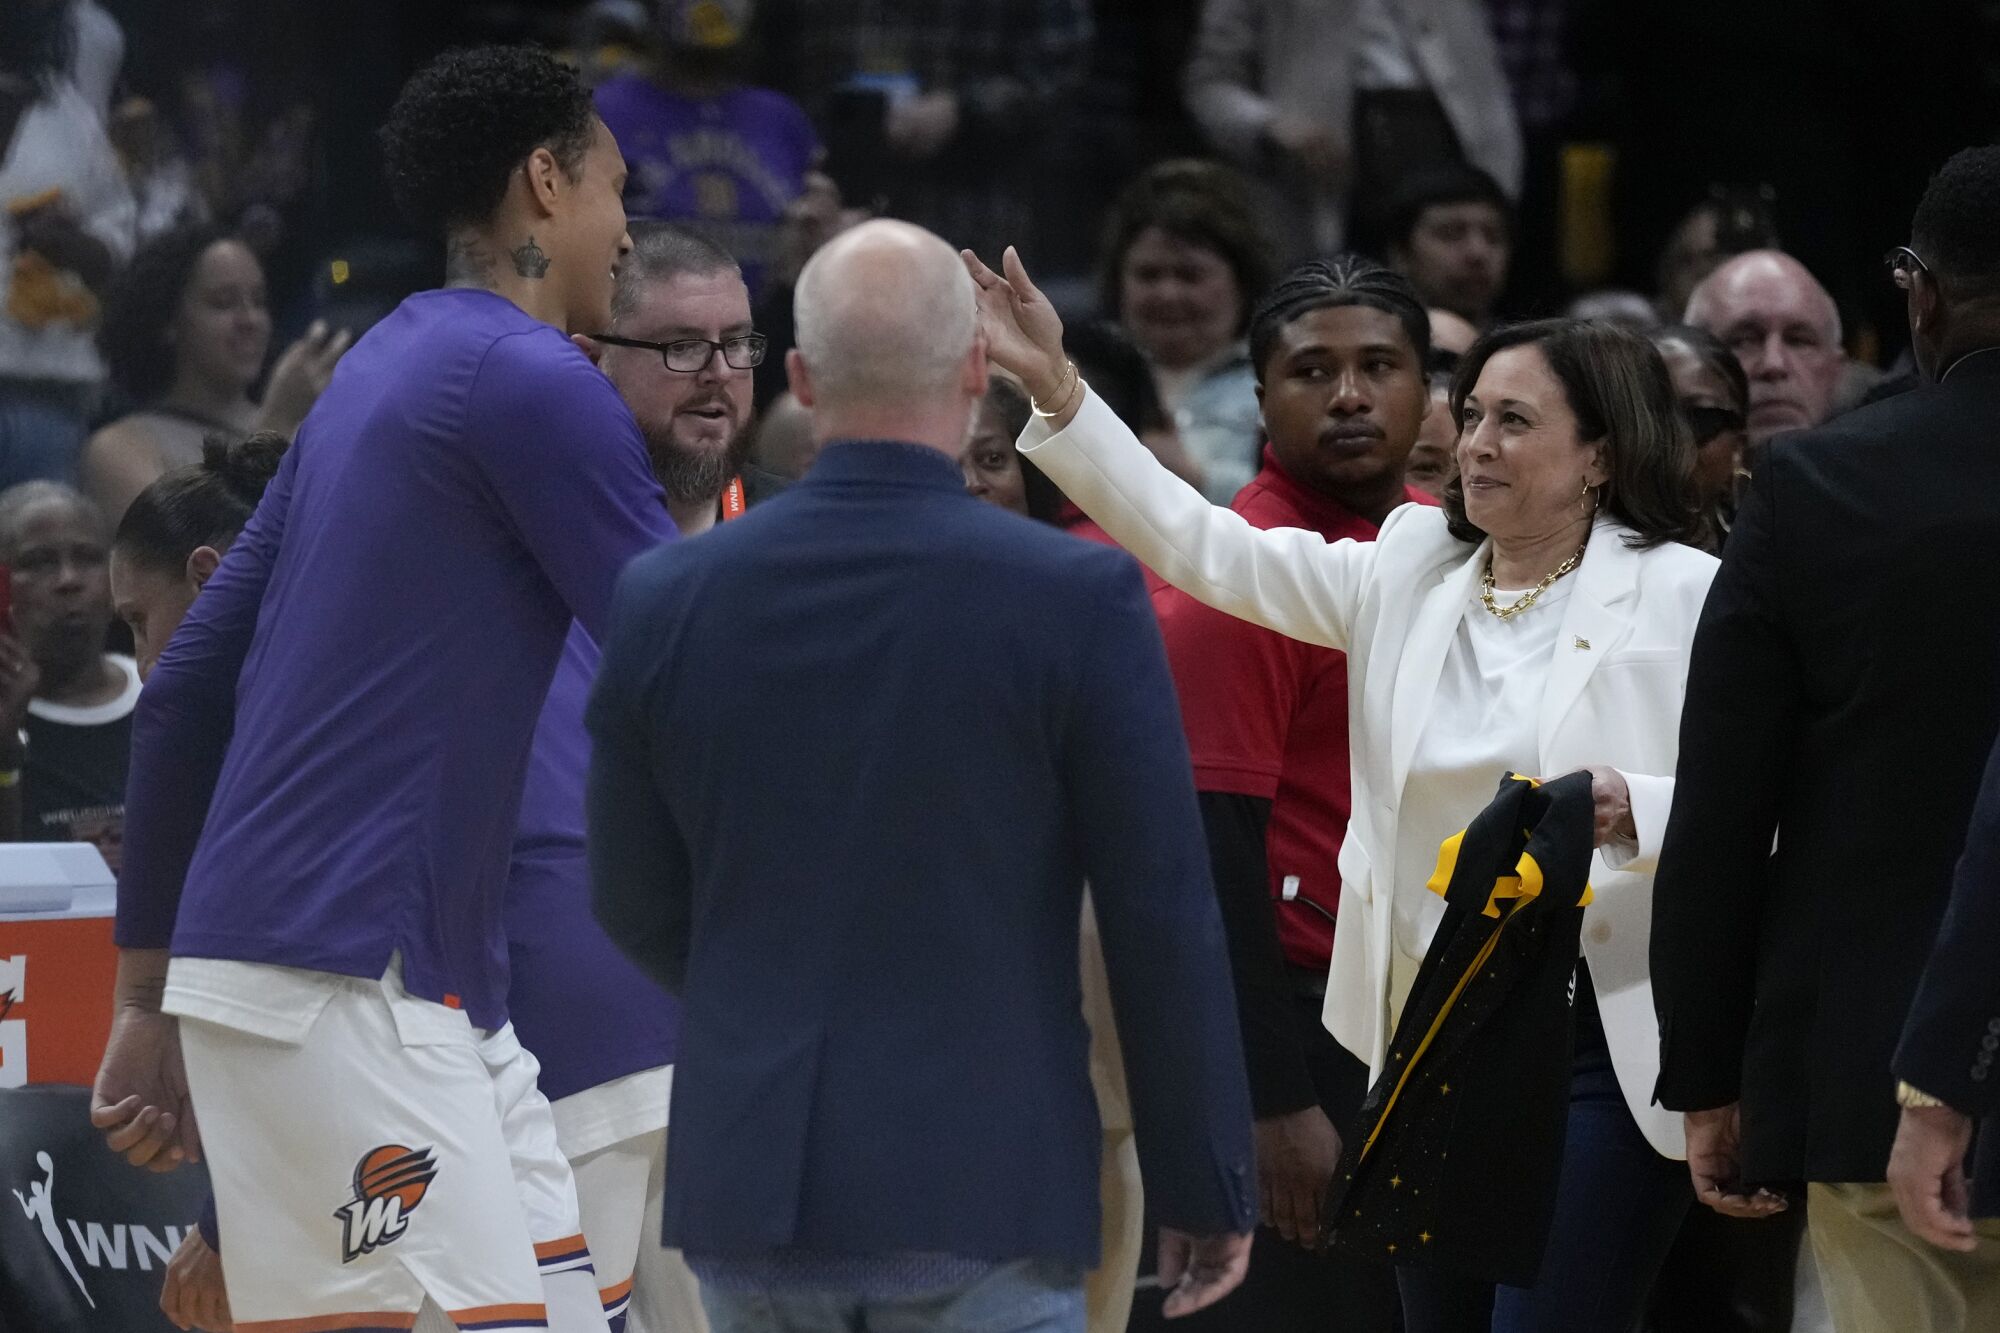 Phoenix Mercury center Brittney Griner is greeted by Vice President Kamala Harris and leans forward for a hug.